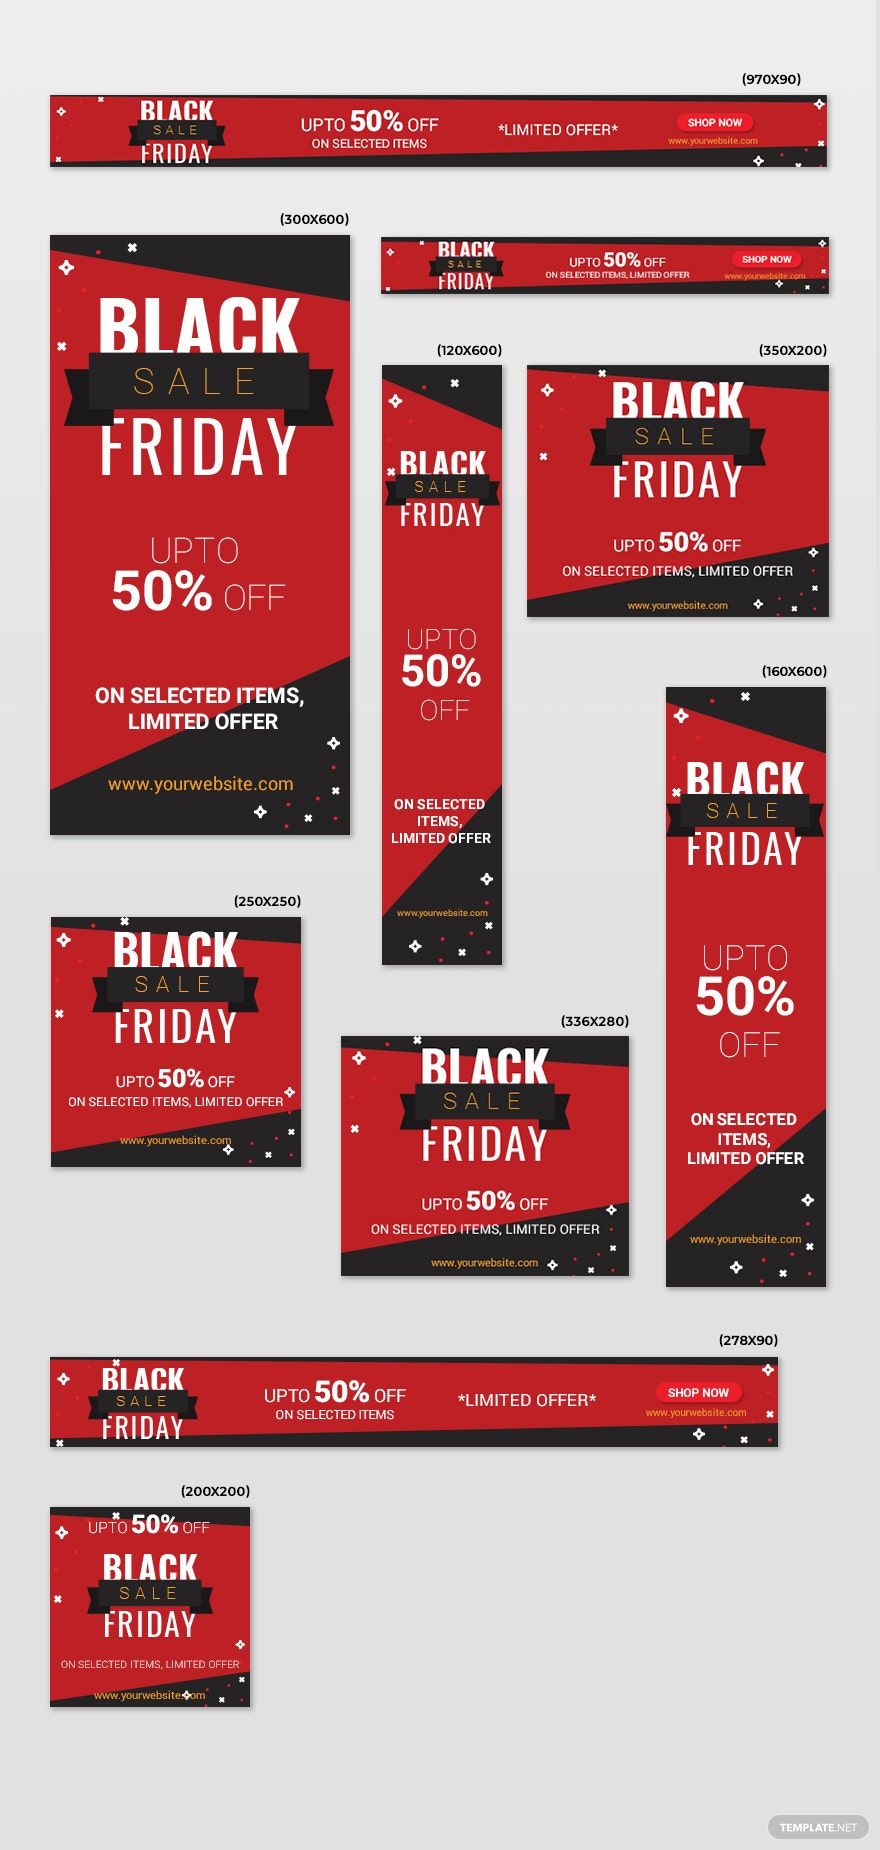 Free Black Friday AD Template